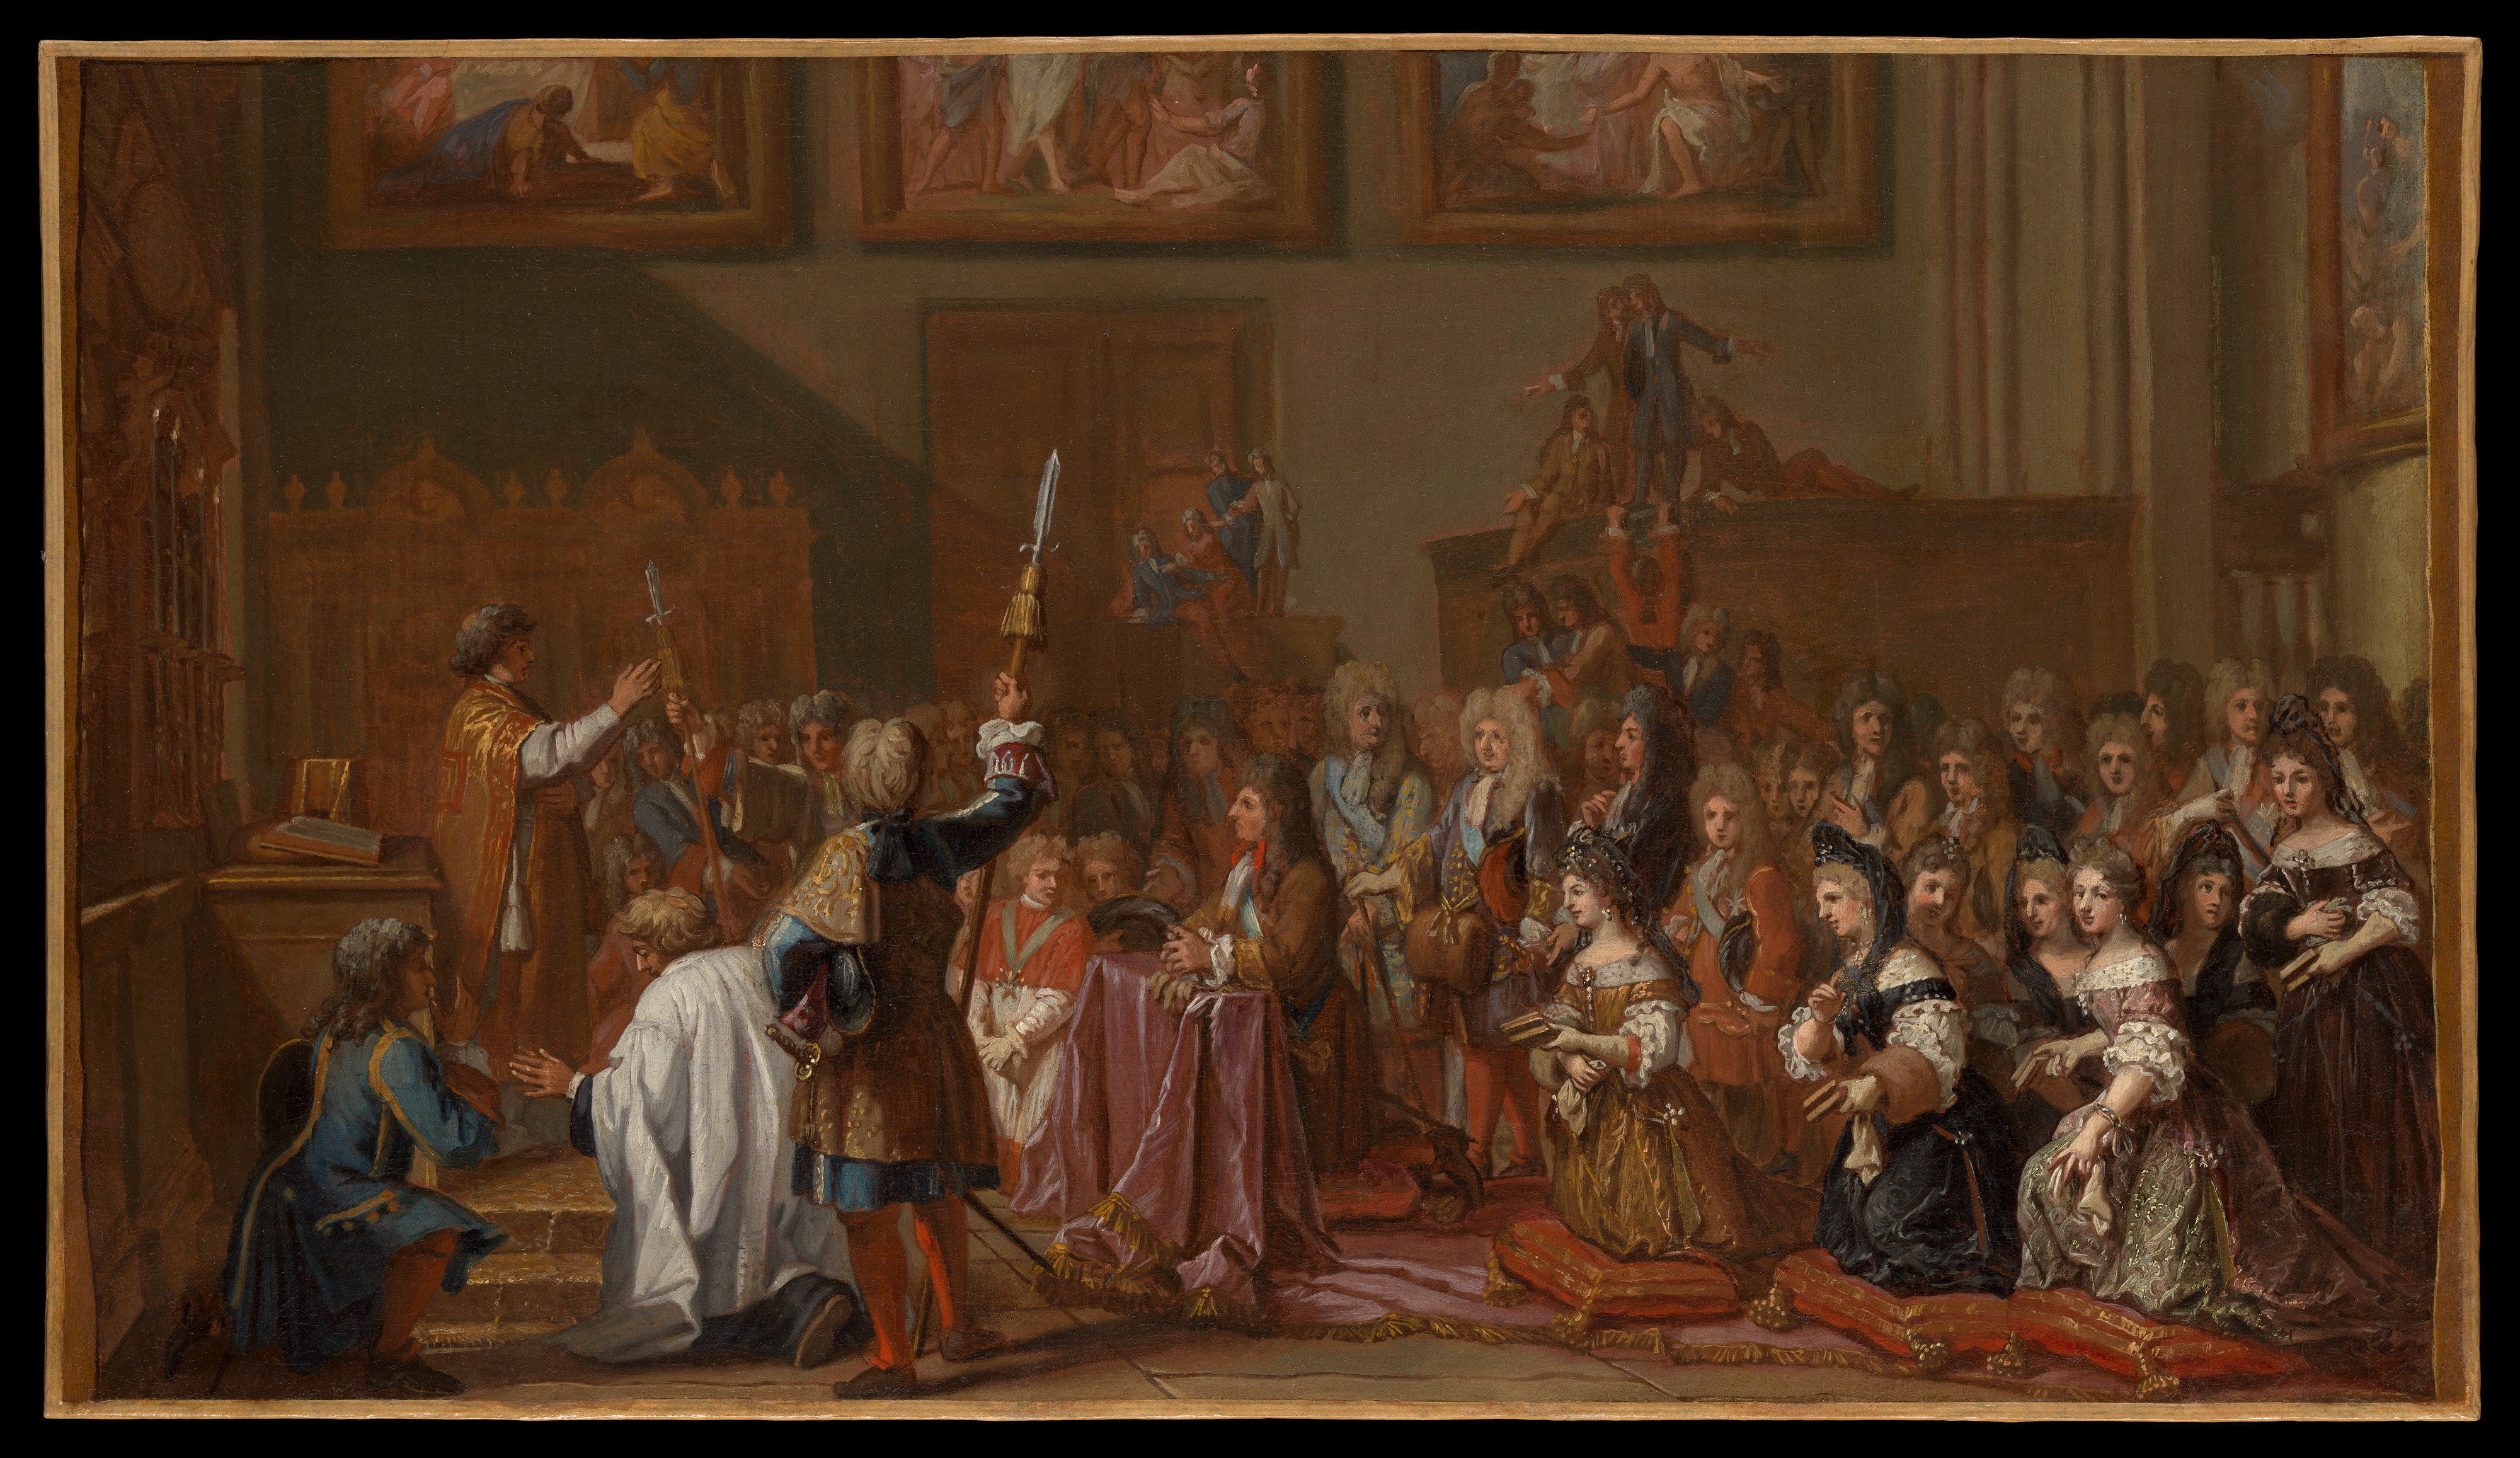 Louis XIV: his mania for the cult of self